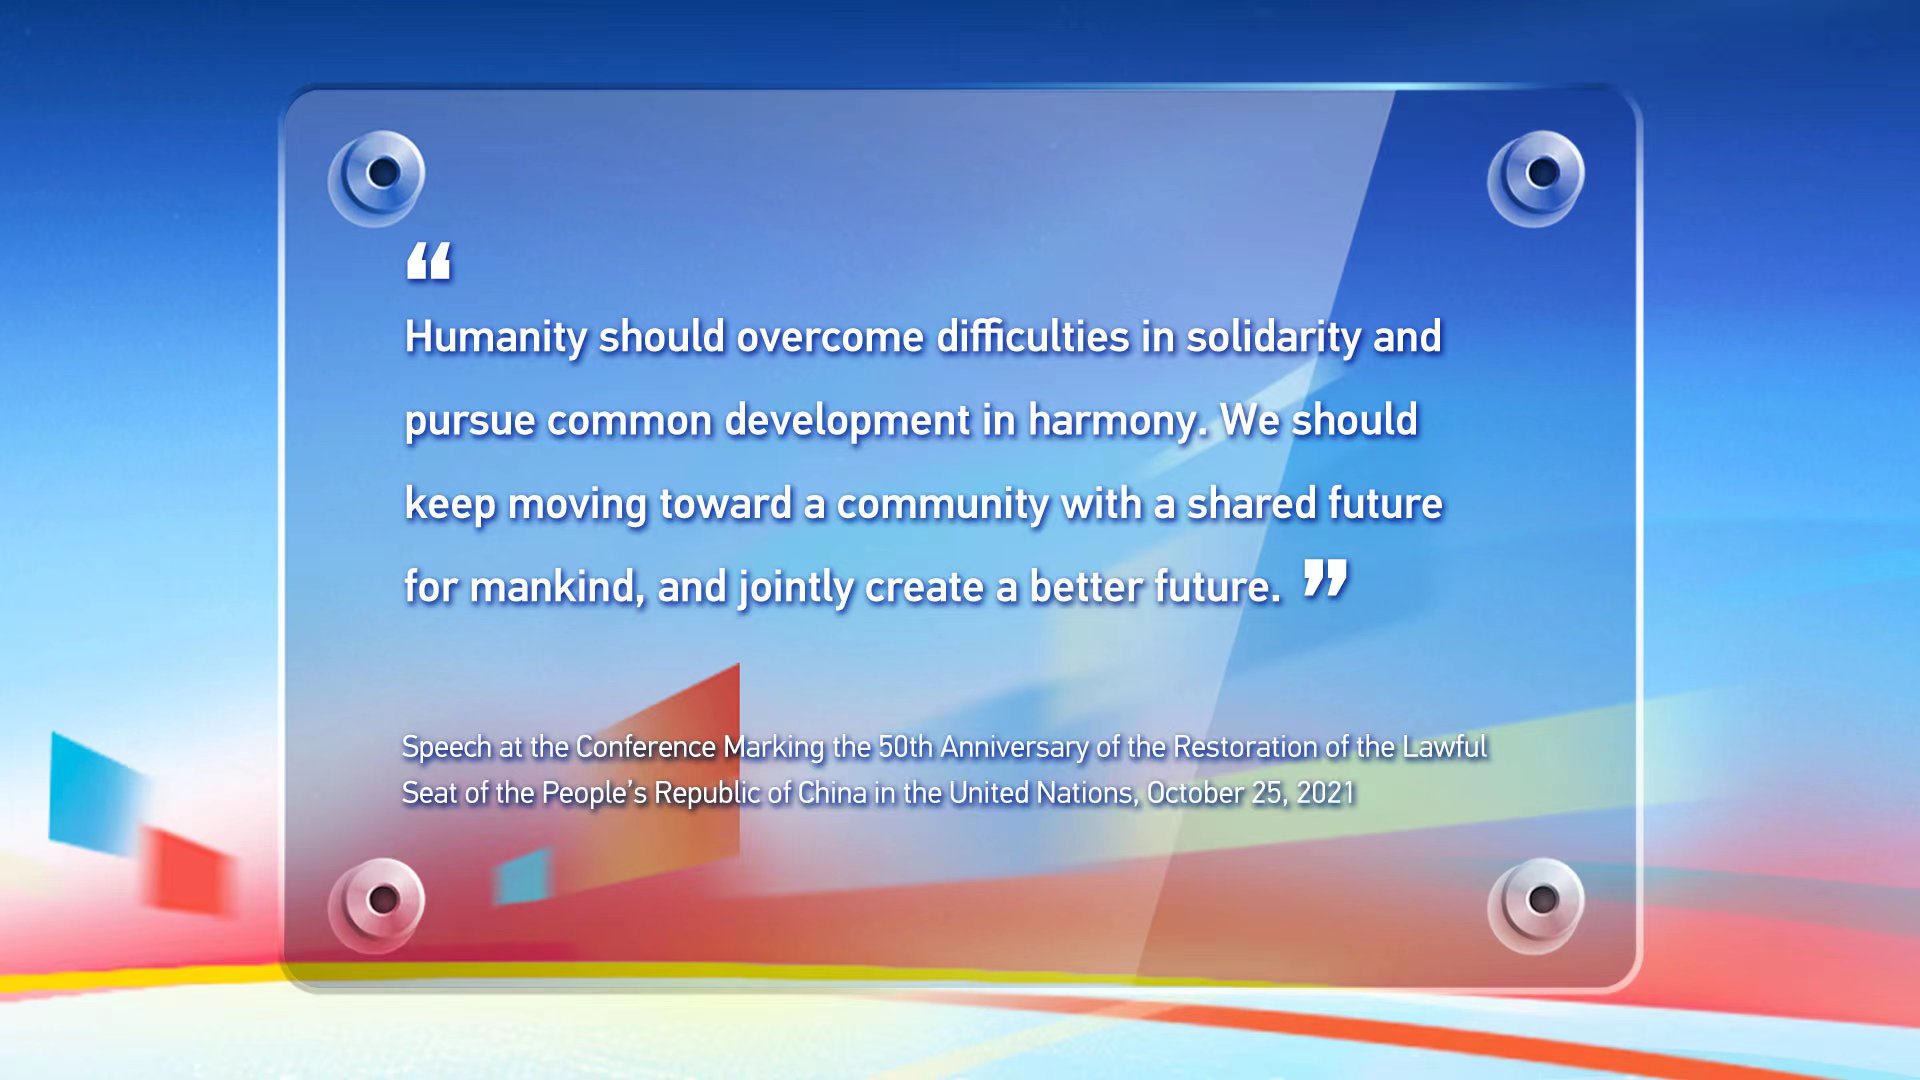 Xi's key quotes on building a community with a shared future for mankind